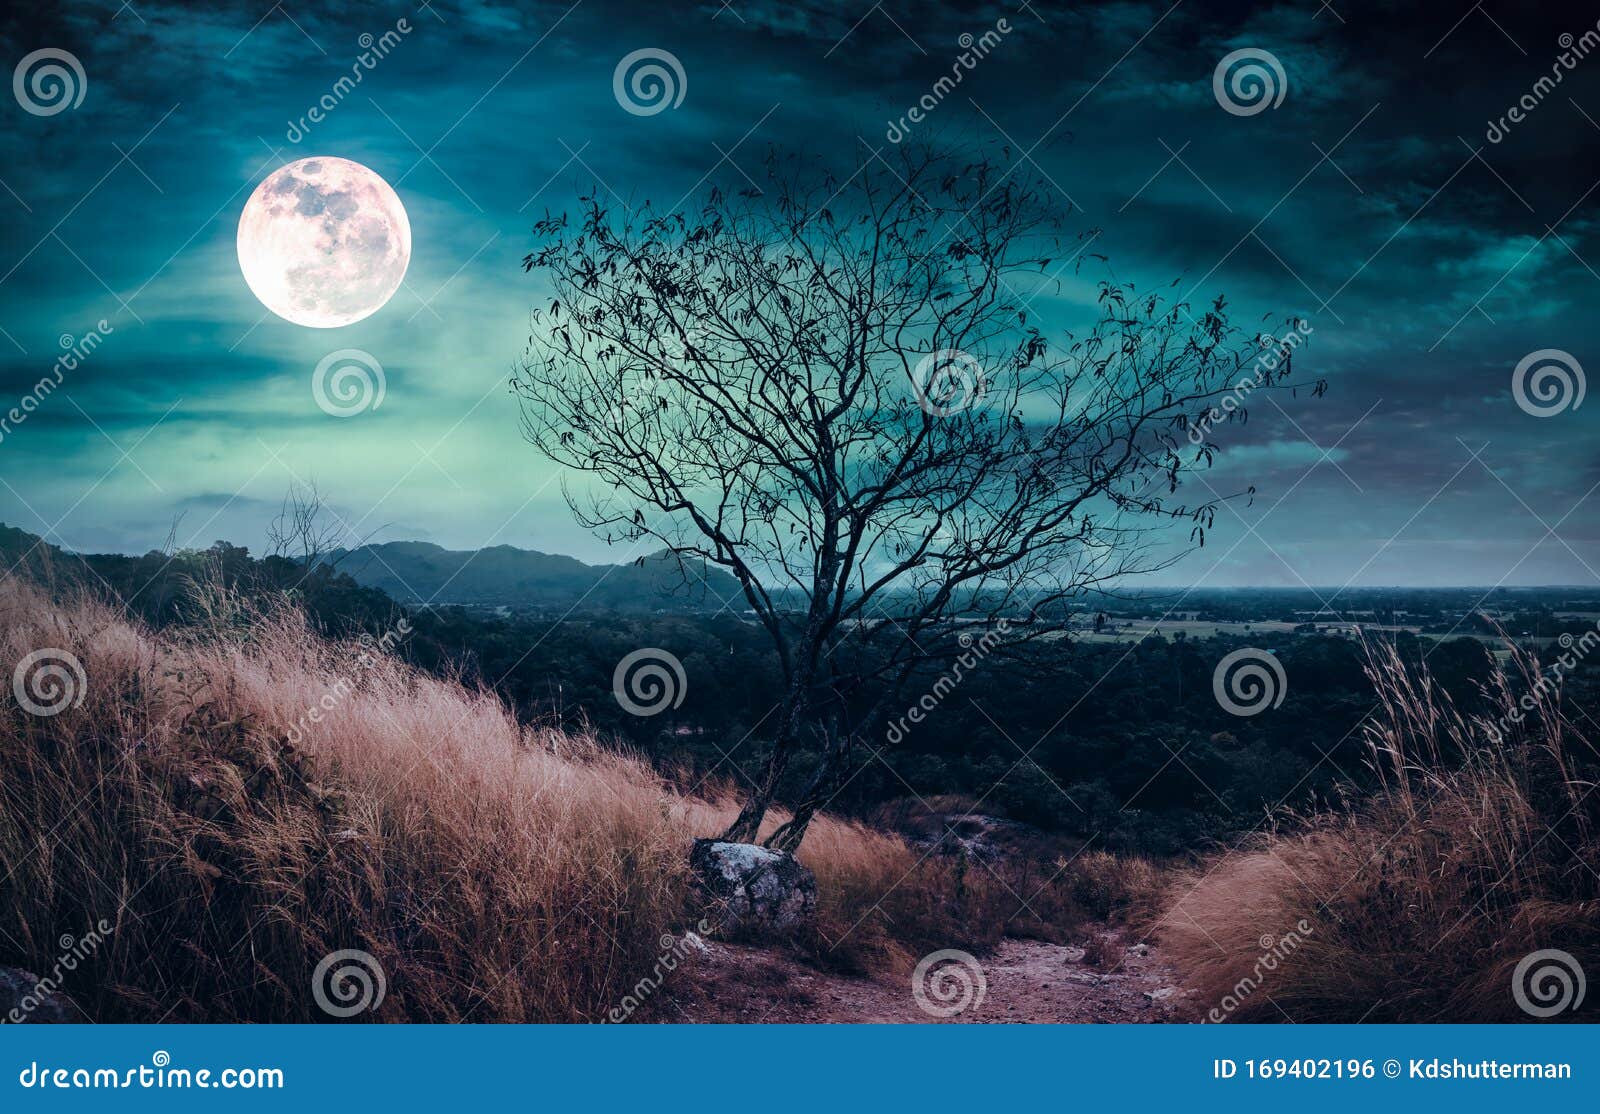 Beautiful Bright Full Moon Above Wilderness Area in Background Stock Photo - Image of grass, moon: 169402196